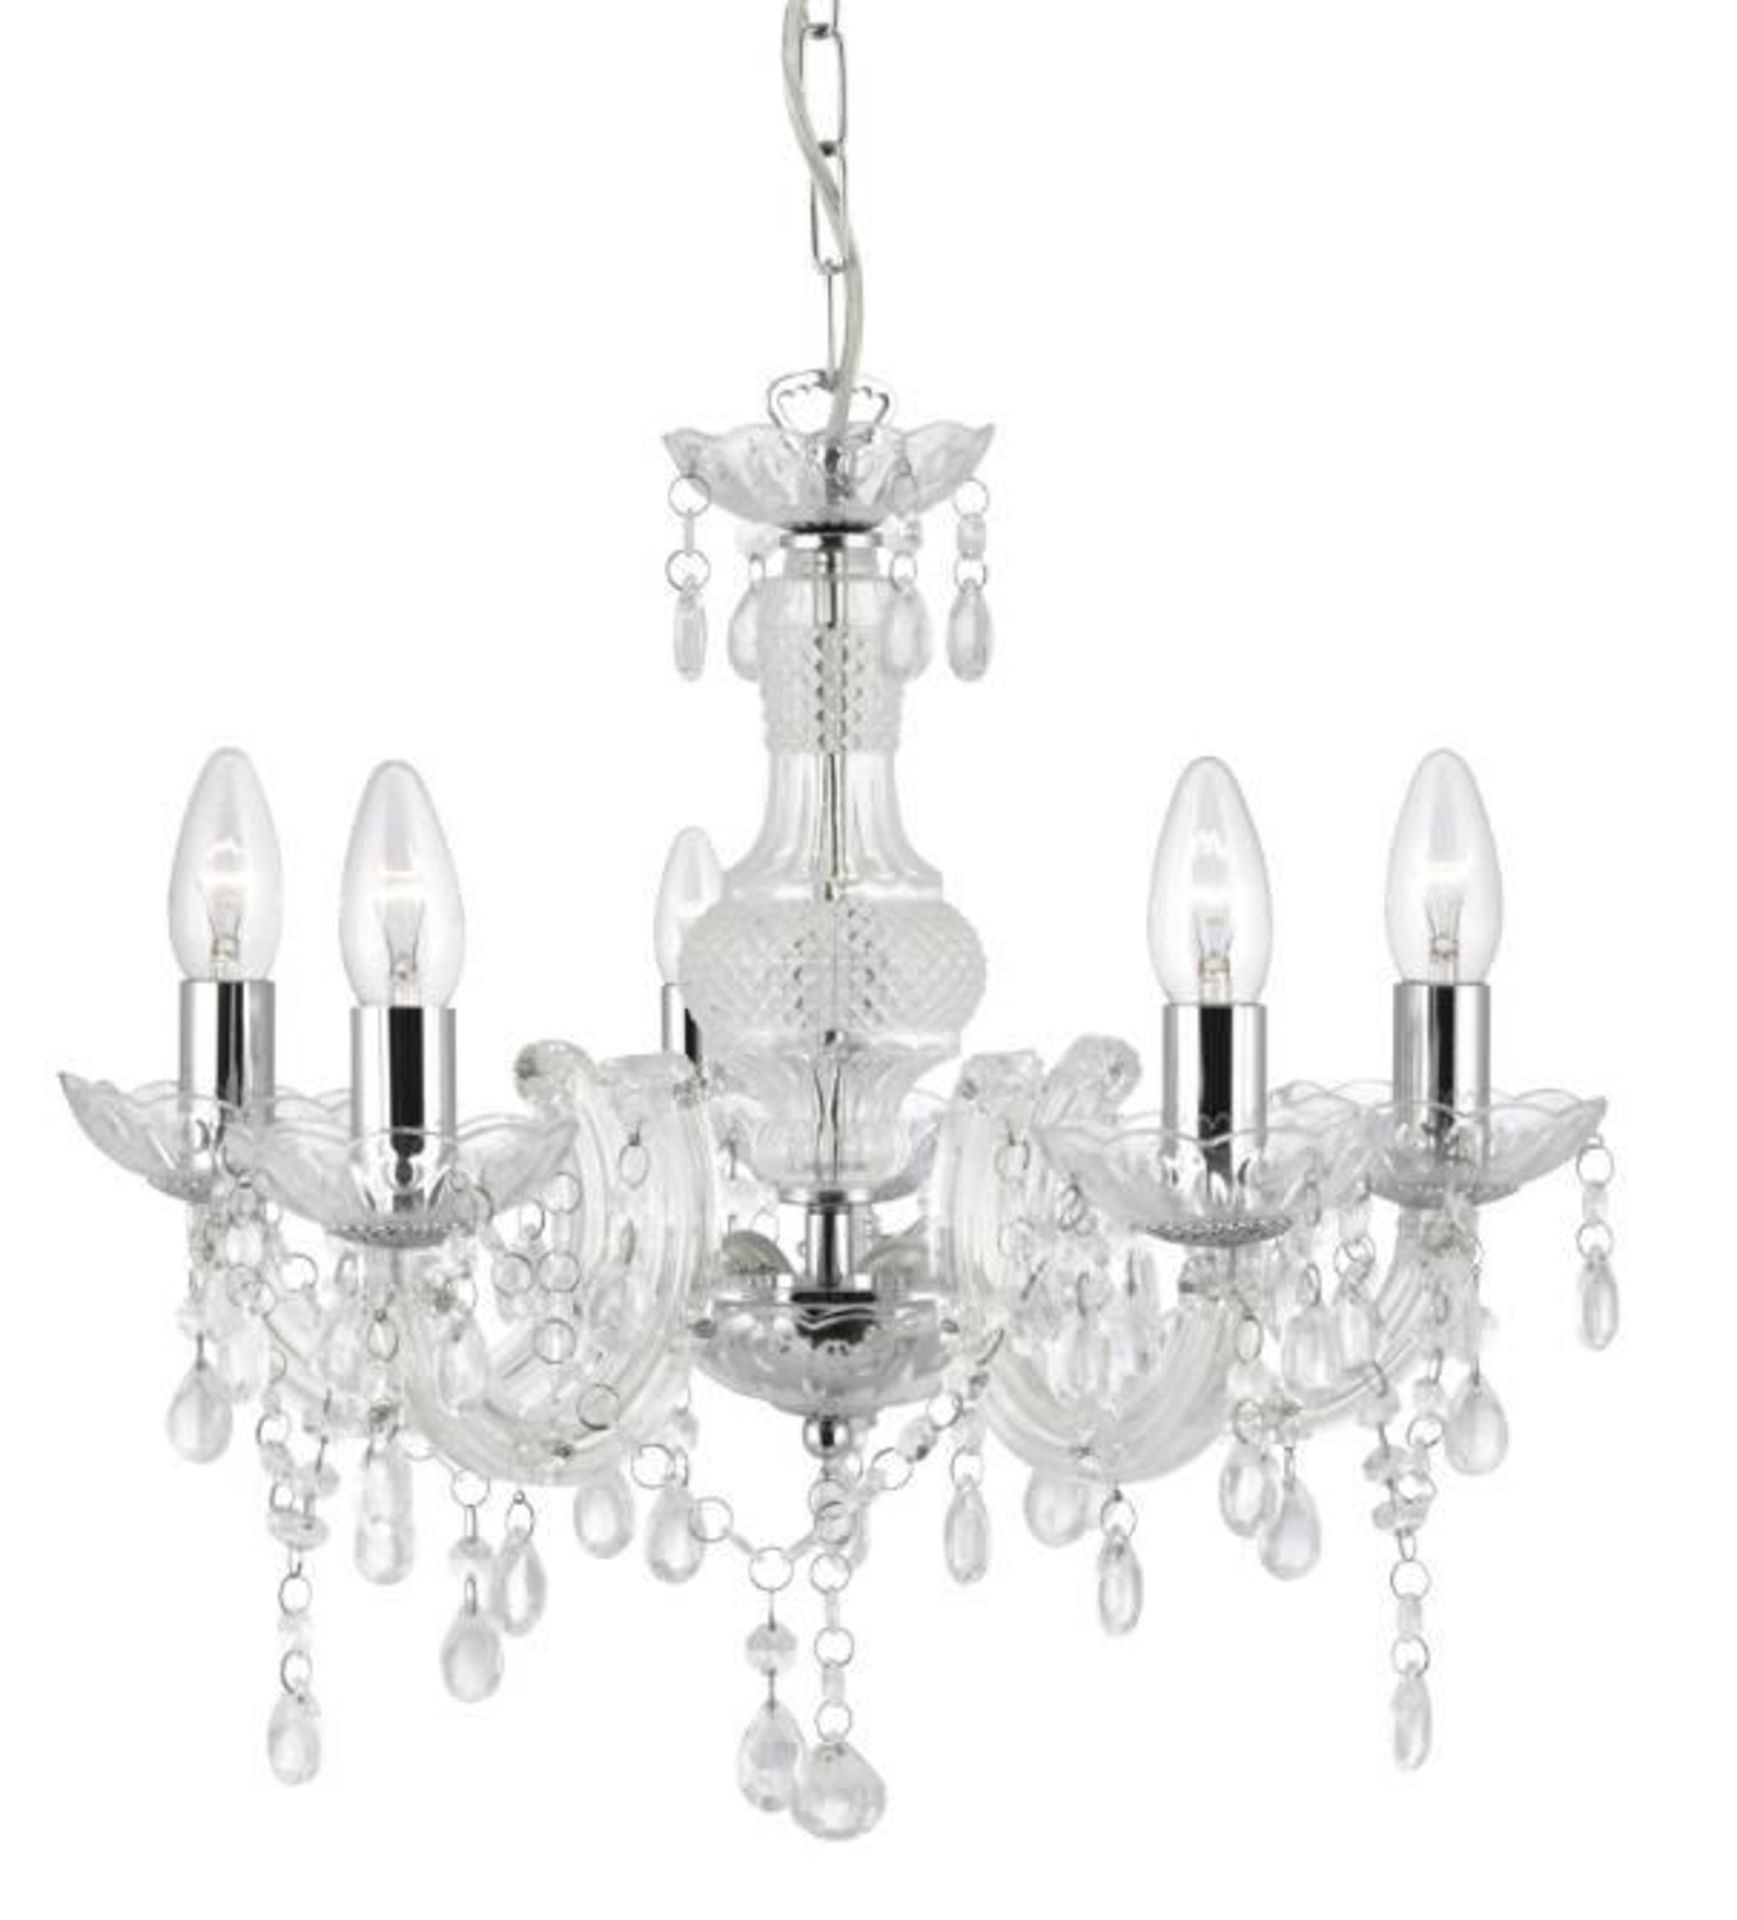 1 x MARIE THERESE Clear 5-Light Chandelier With Clear Acrylic Drops - Product Code 1455-5CL - New Bo - Image 4 of 4